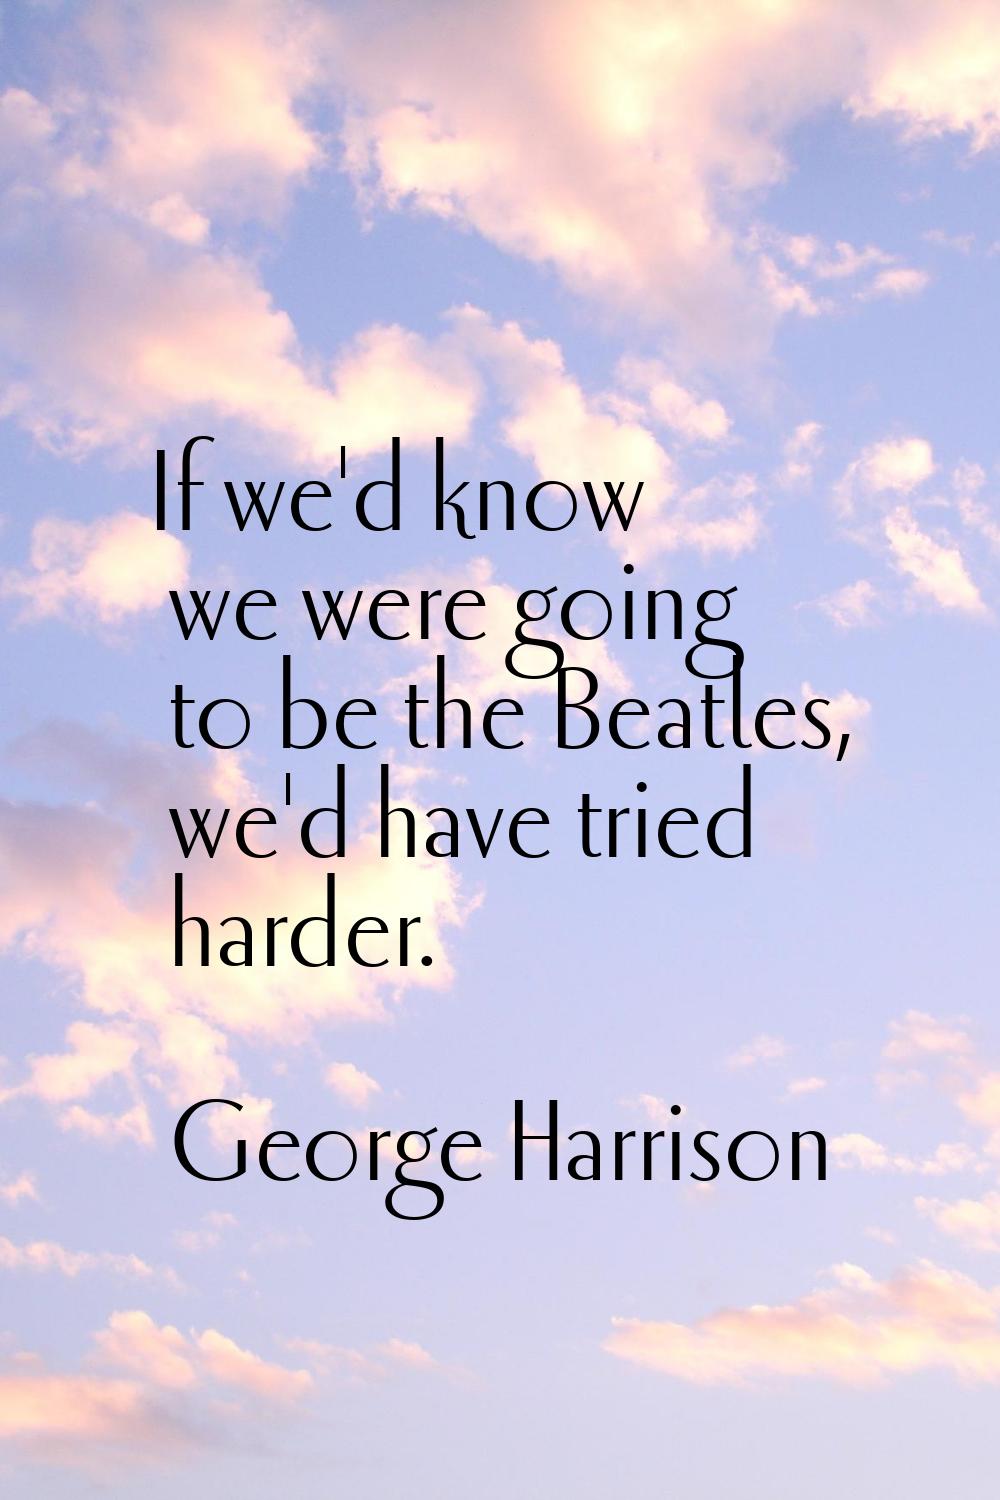 If we'd know we were going to be the Beatles, we'd have tried harder.